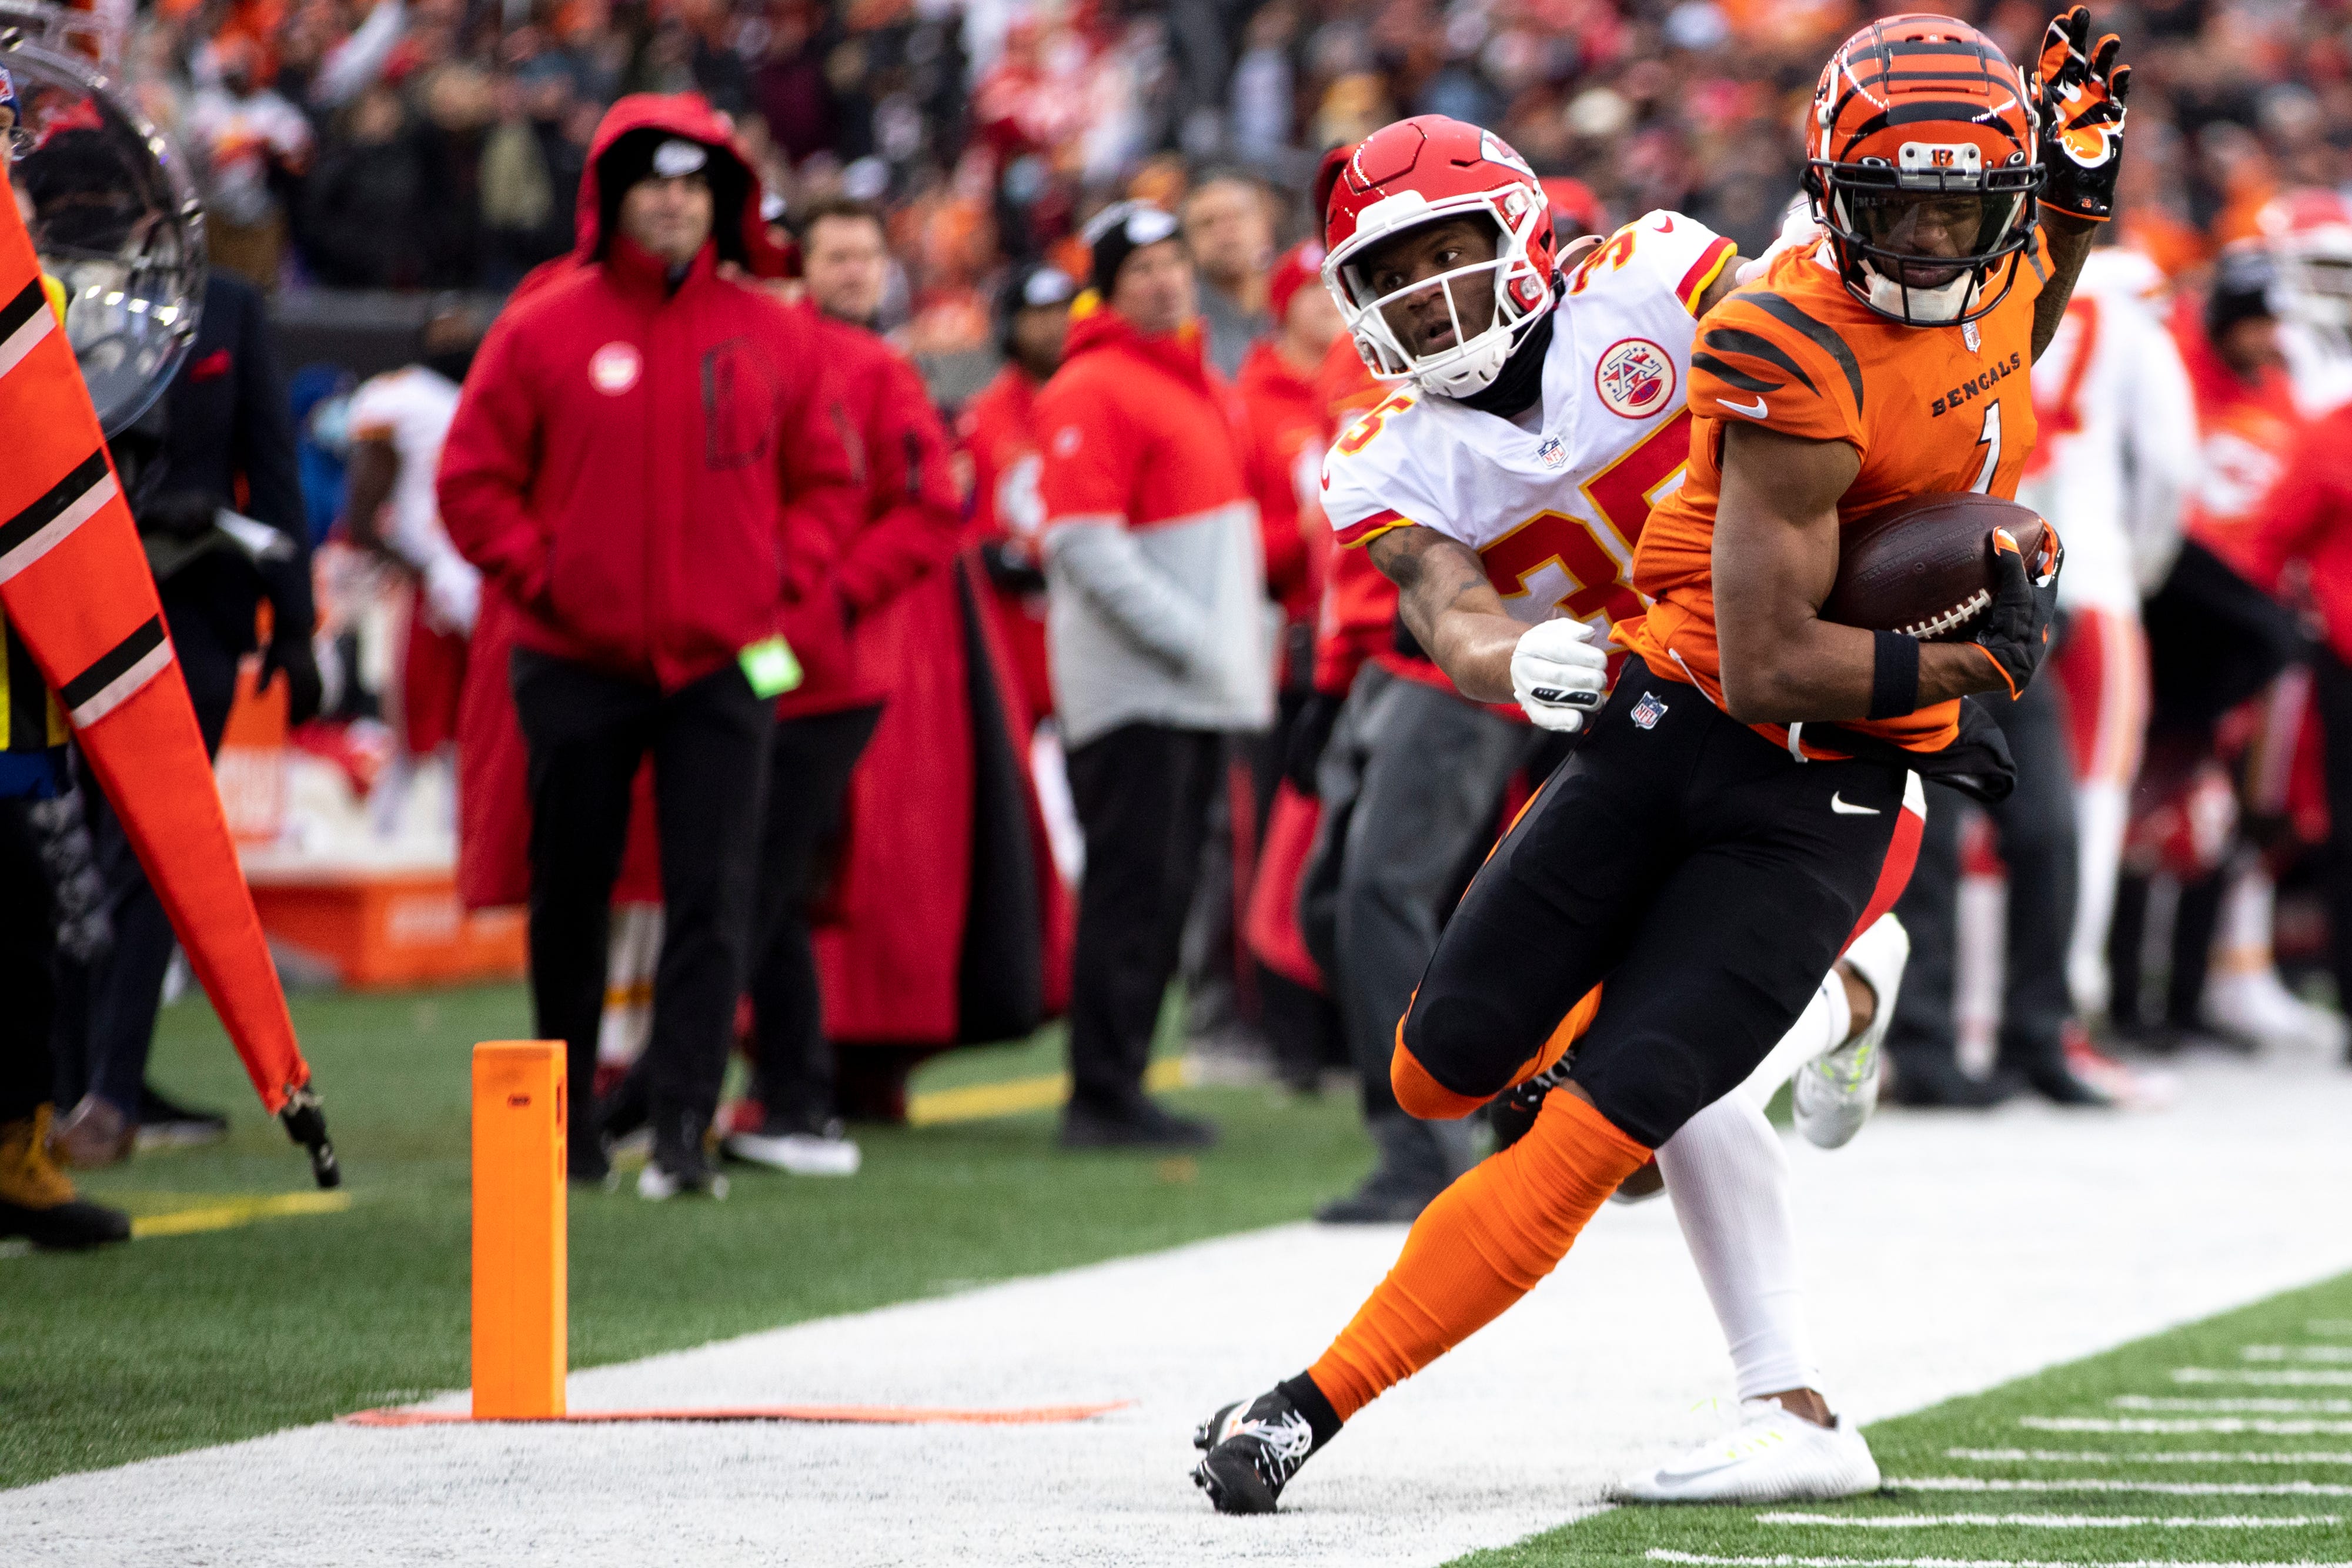 Bengals star Ja'Marr Chase vs Chiefs in the AFC Championship